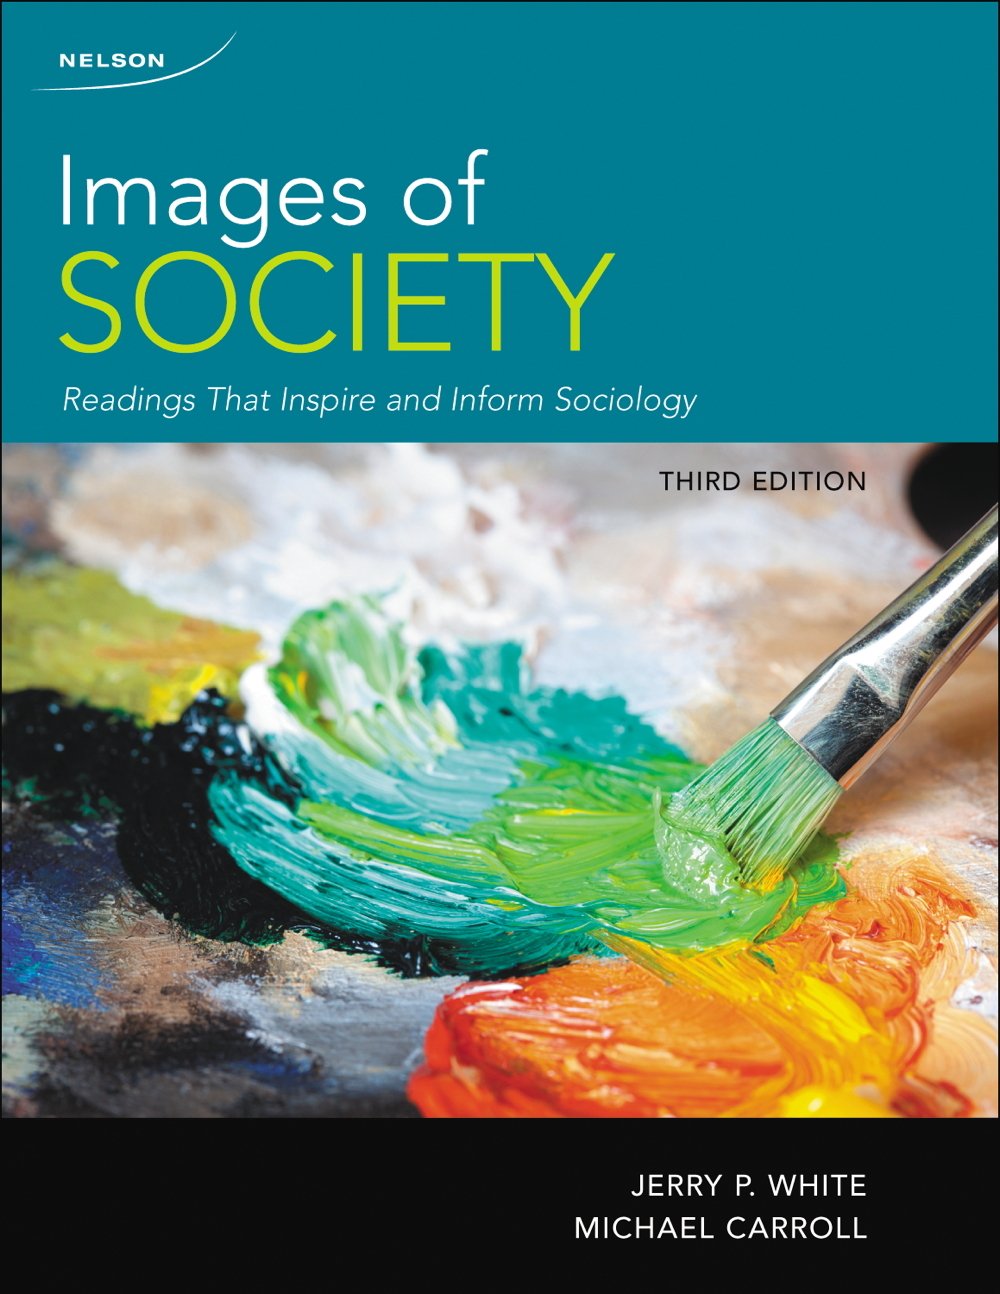 Sociology　Hat　Book　Society:　Inform　Top　Readings　of　—　That　and　Inspire　Images　Shop